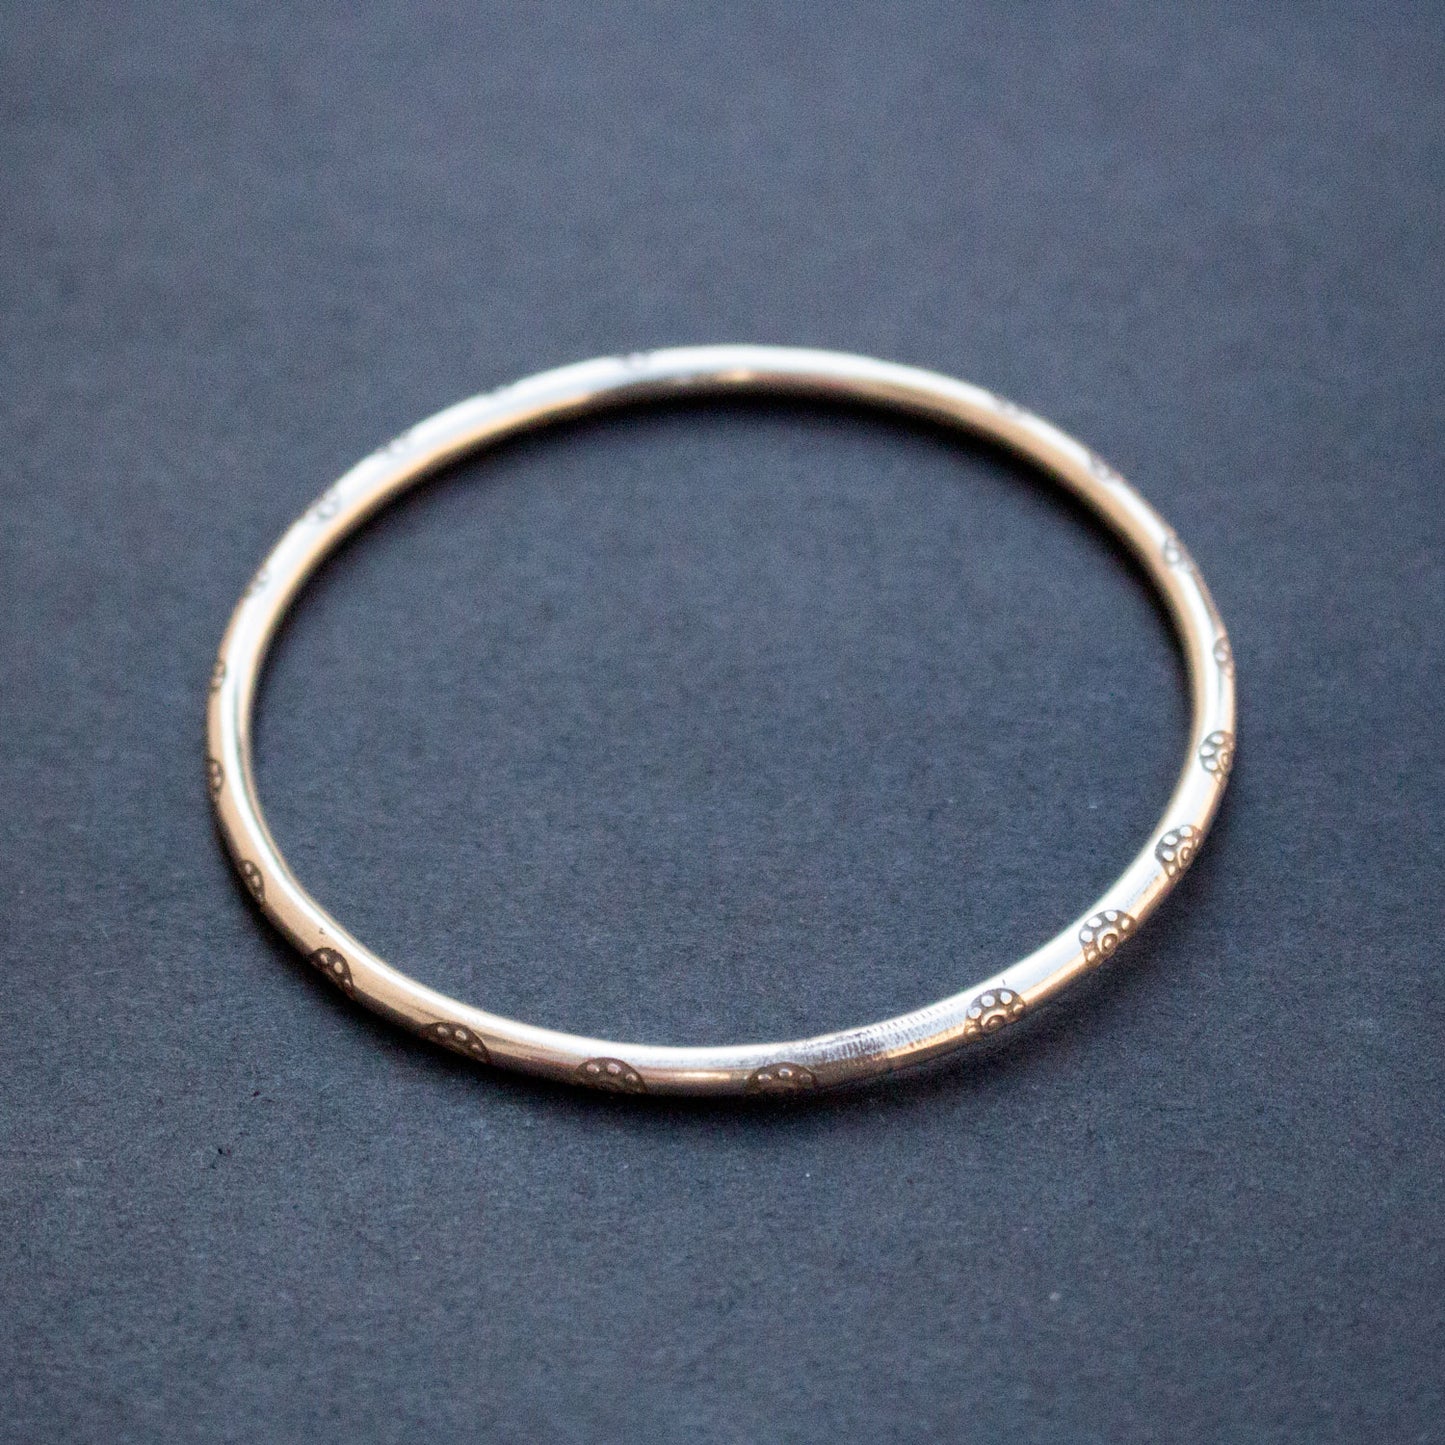 Etched sterling silver bangle